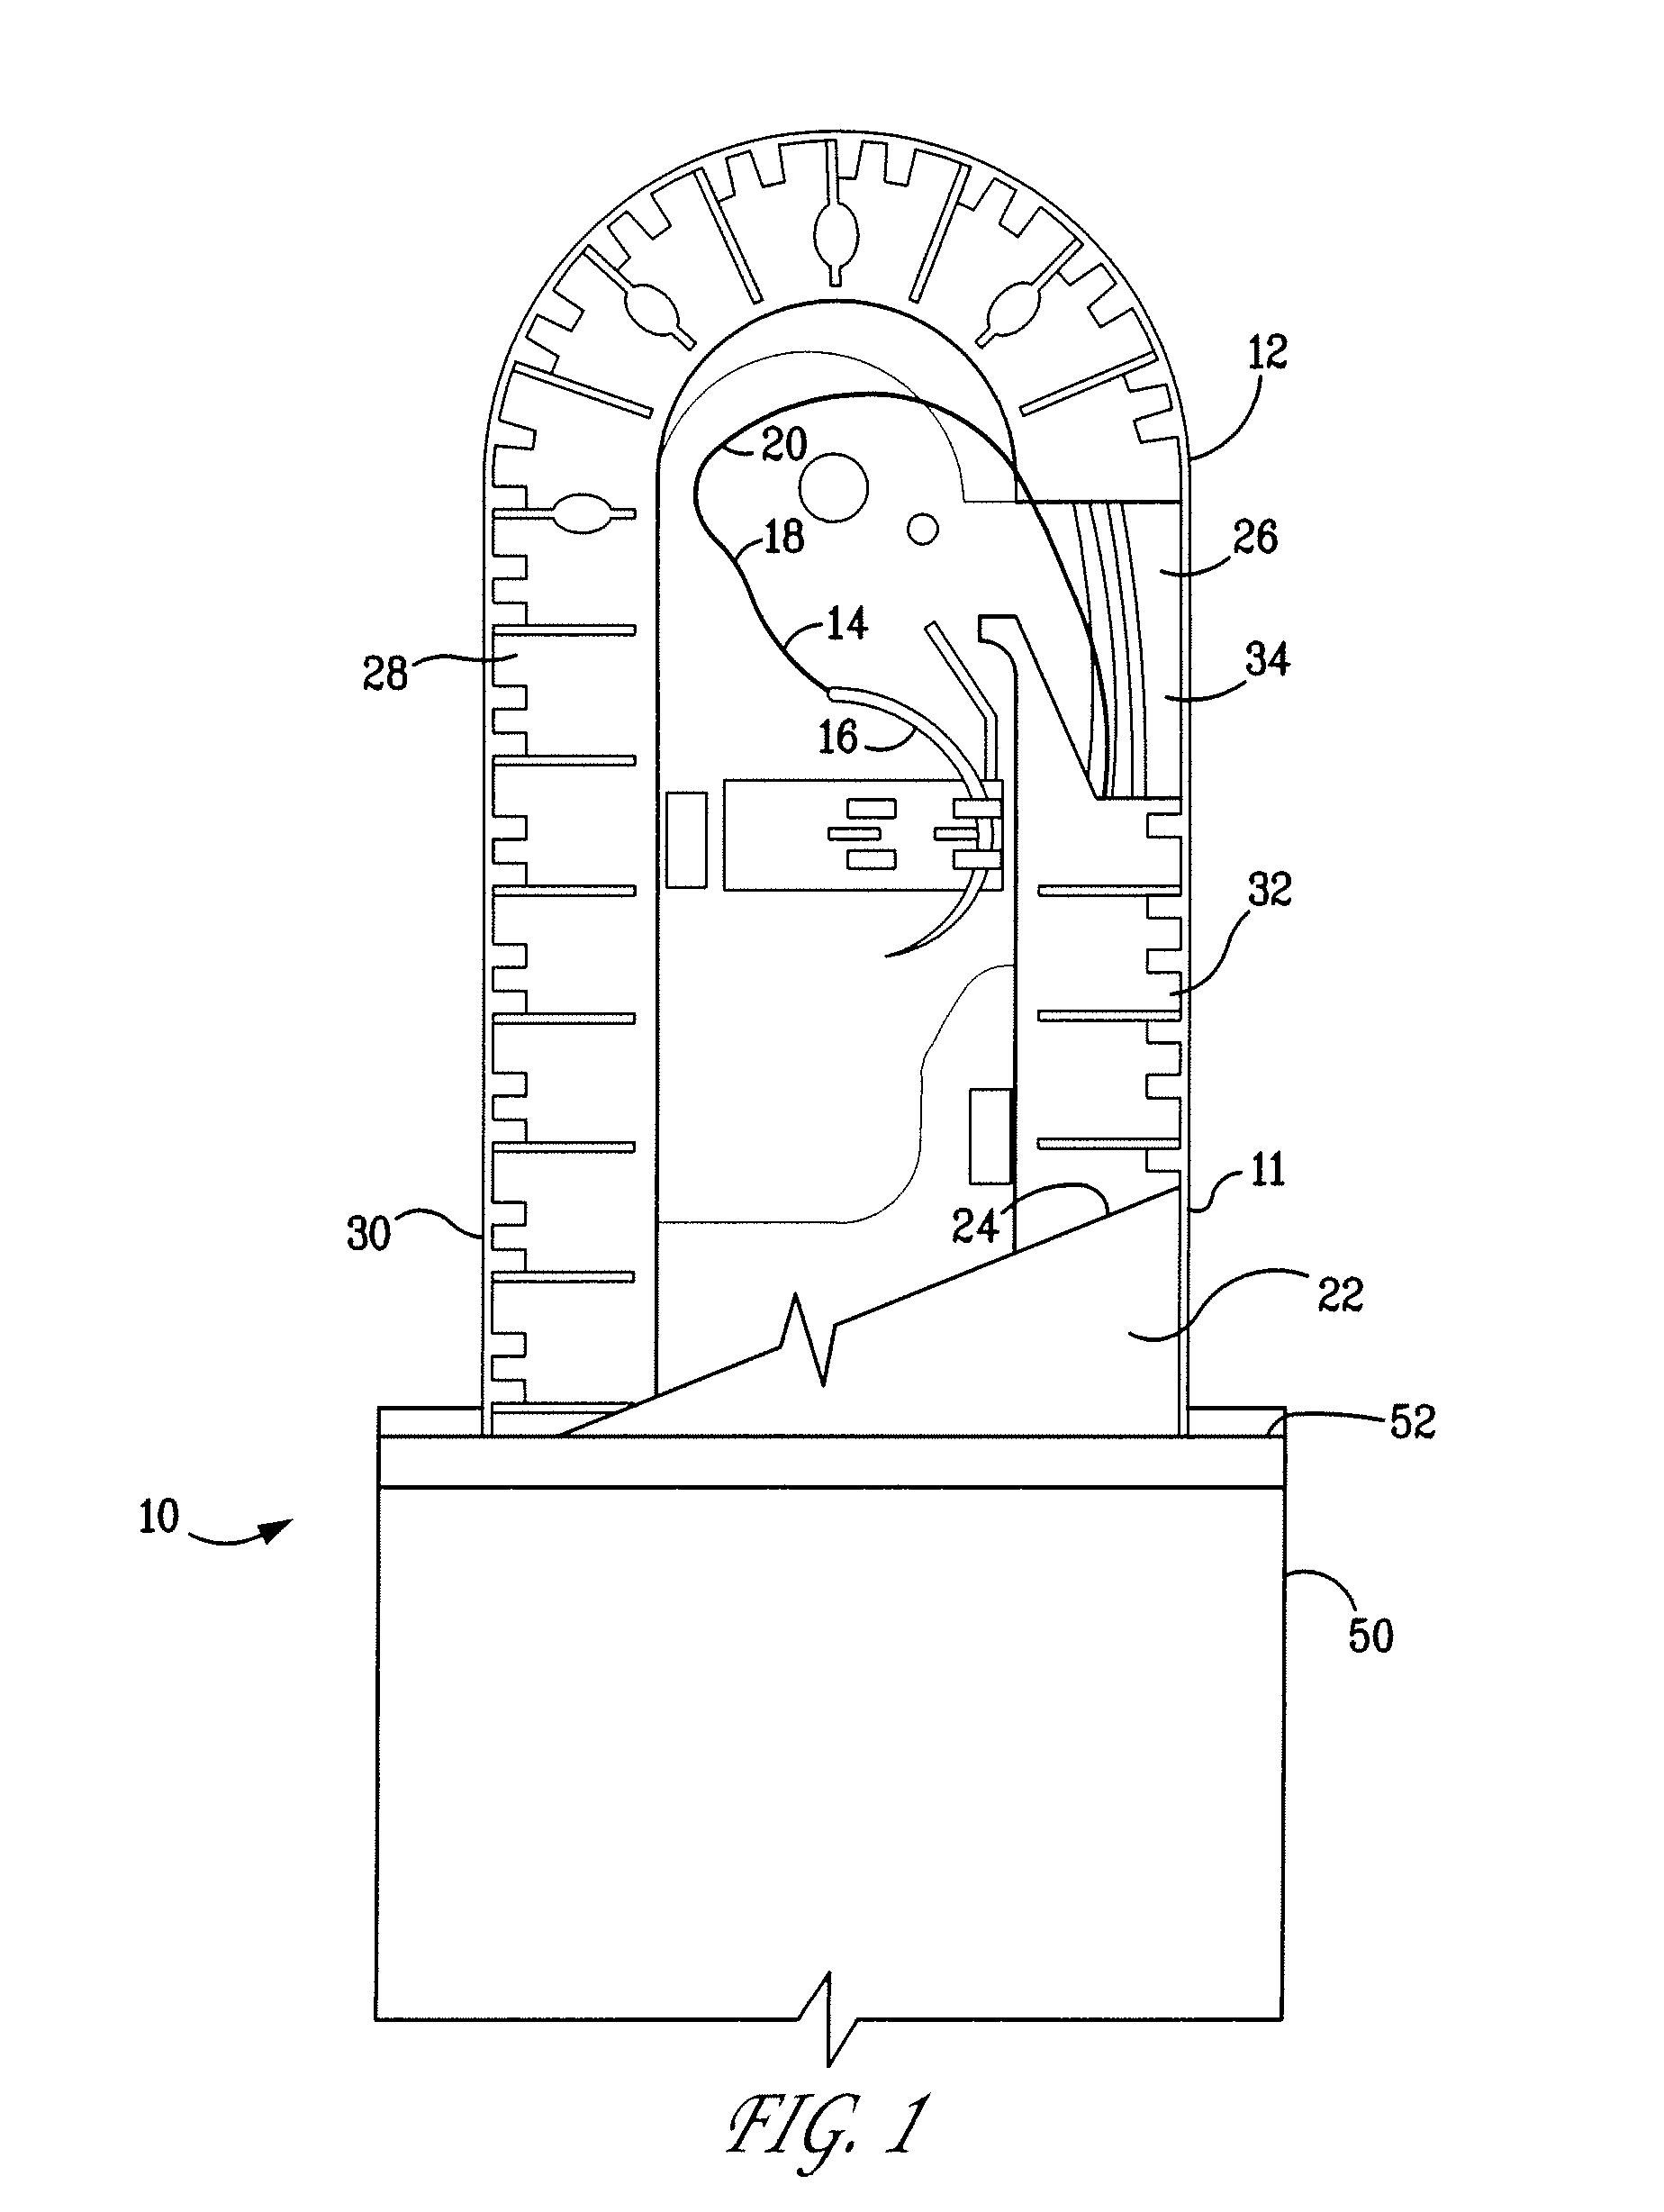 Method of making a packaged antimicrobial suture